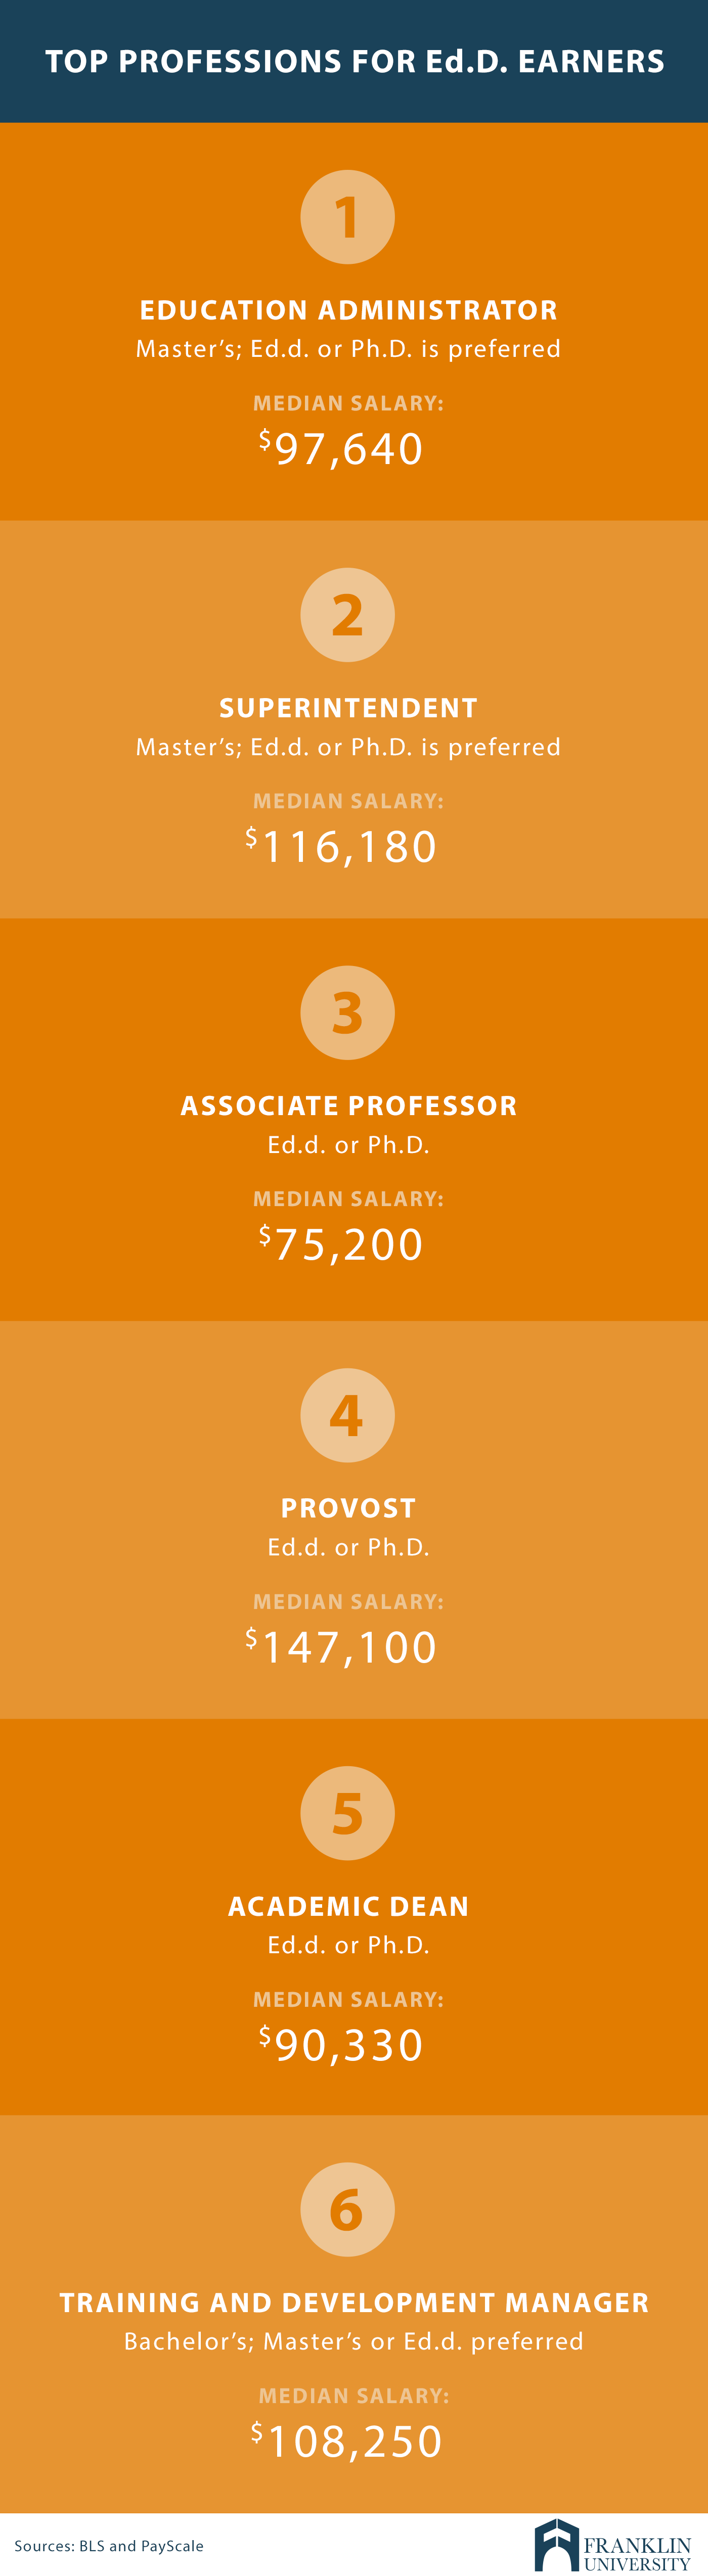 graphic describes the top professions for Ed.D. earners